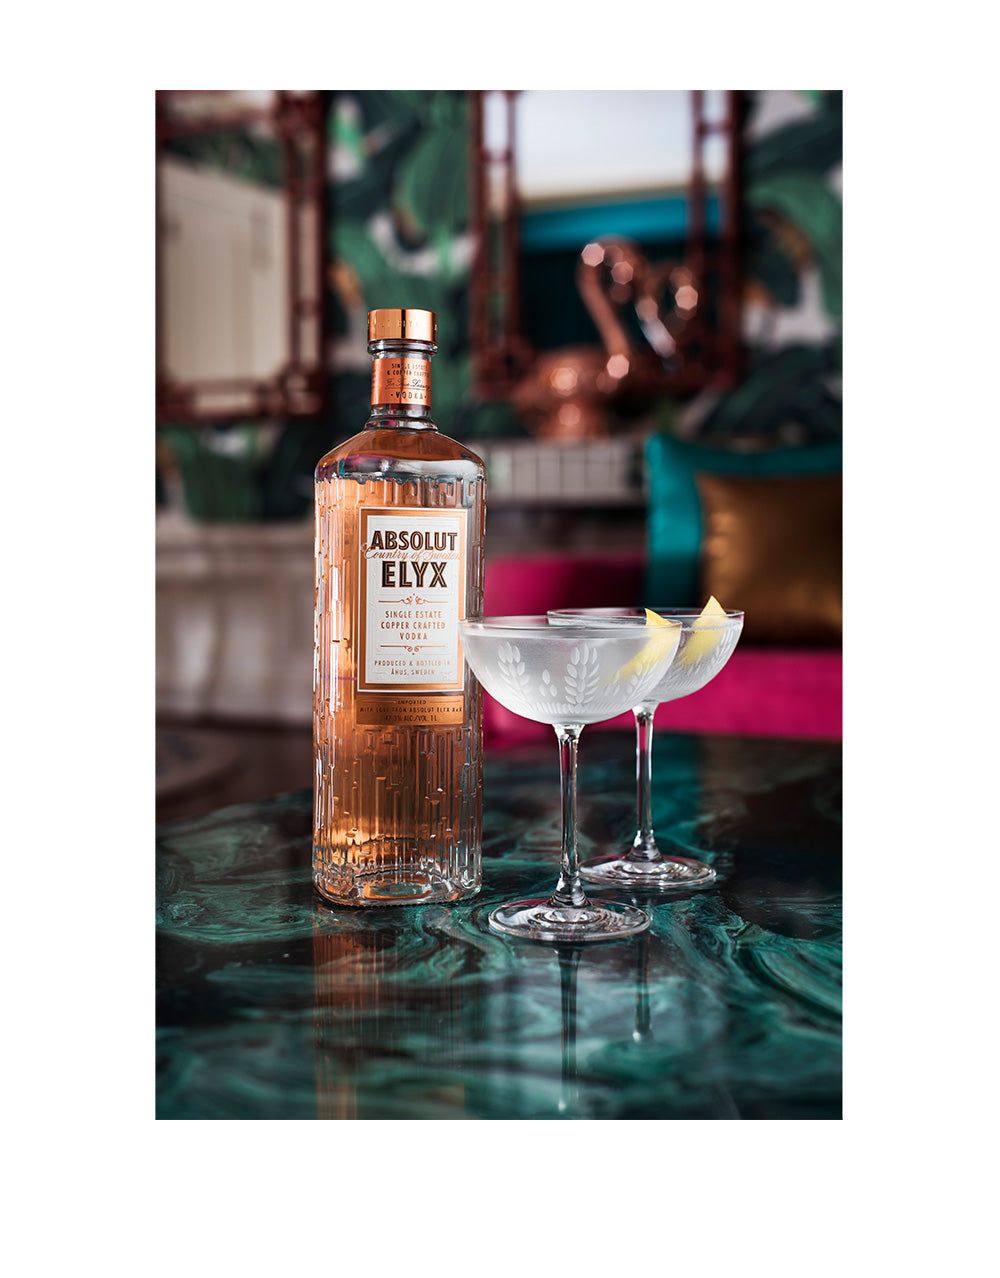 Absolut Elyx Single Estate Handcrafted Vodka on a bar with cocktails